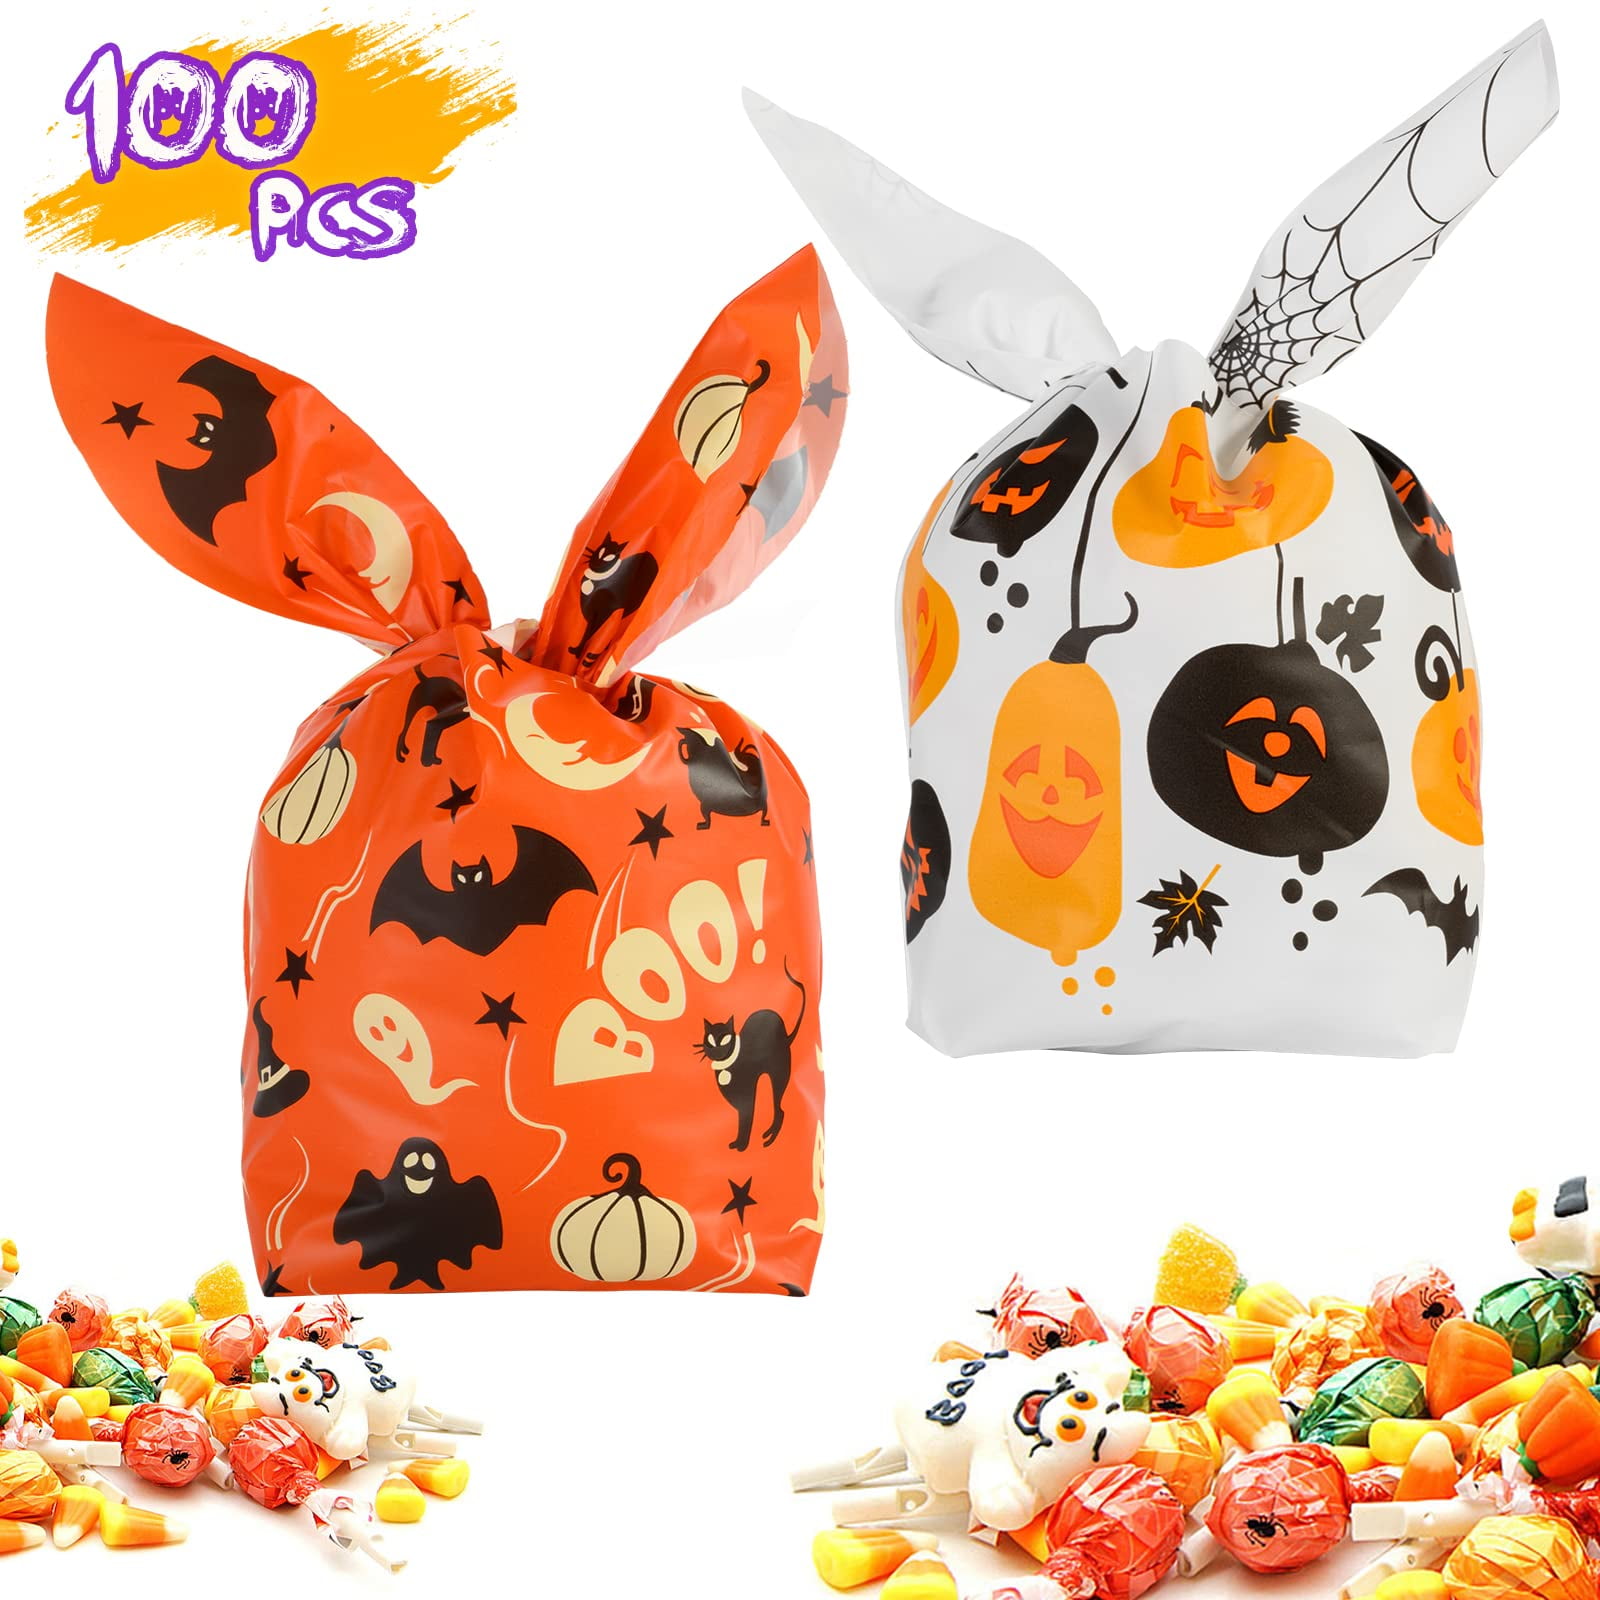 HiYZ Snack Bags for Kids,10PCS Reusable Candy Bags,Cute Animal